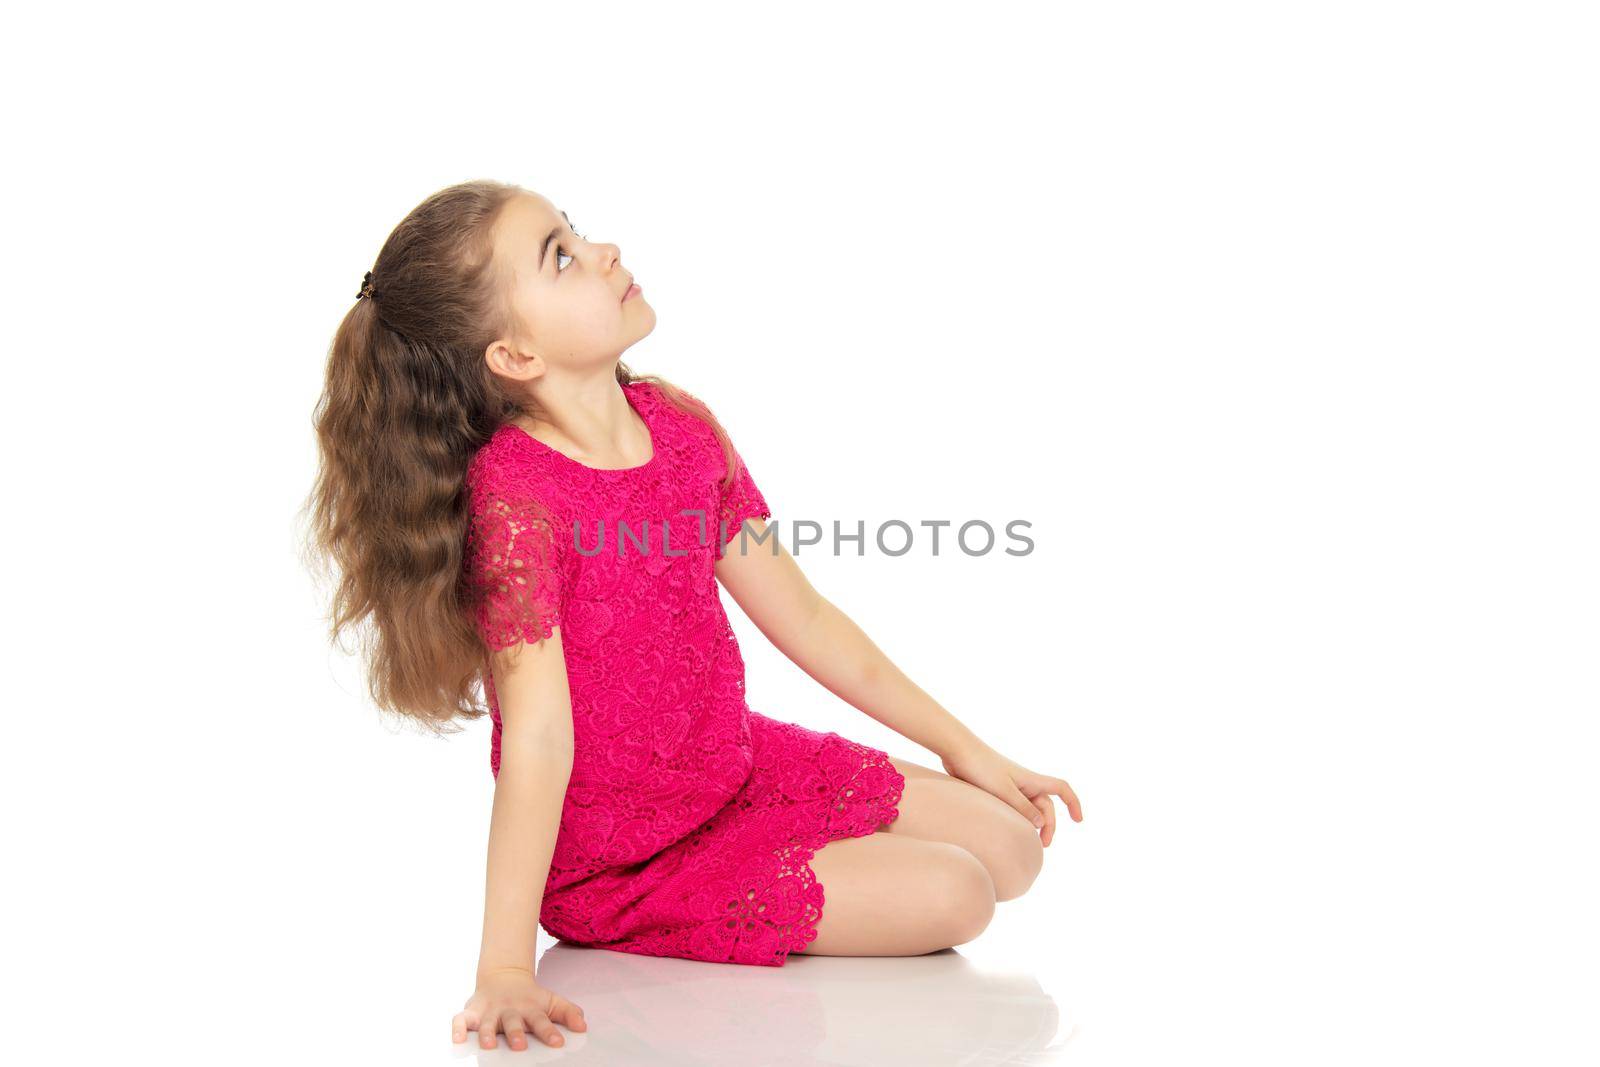 A beautiful little girl of primary school age, with long flowing hair, in a bright red dress.She sat down on her knees and looked up at the camera, turning sideways.Isolated on white background.